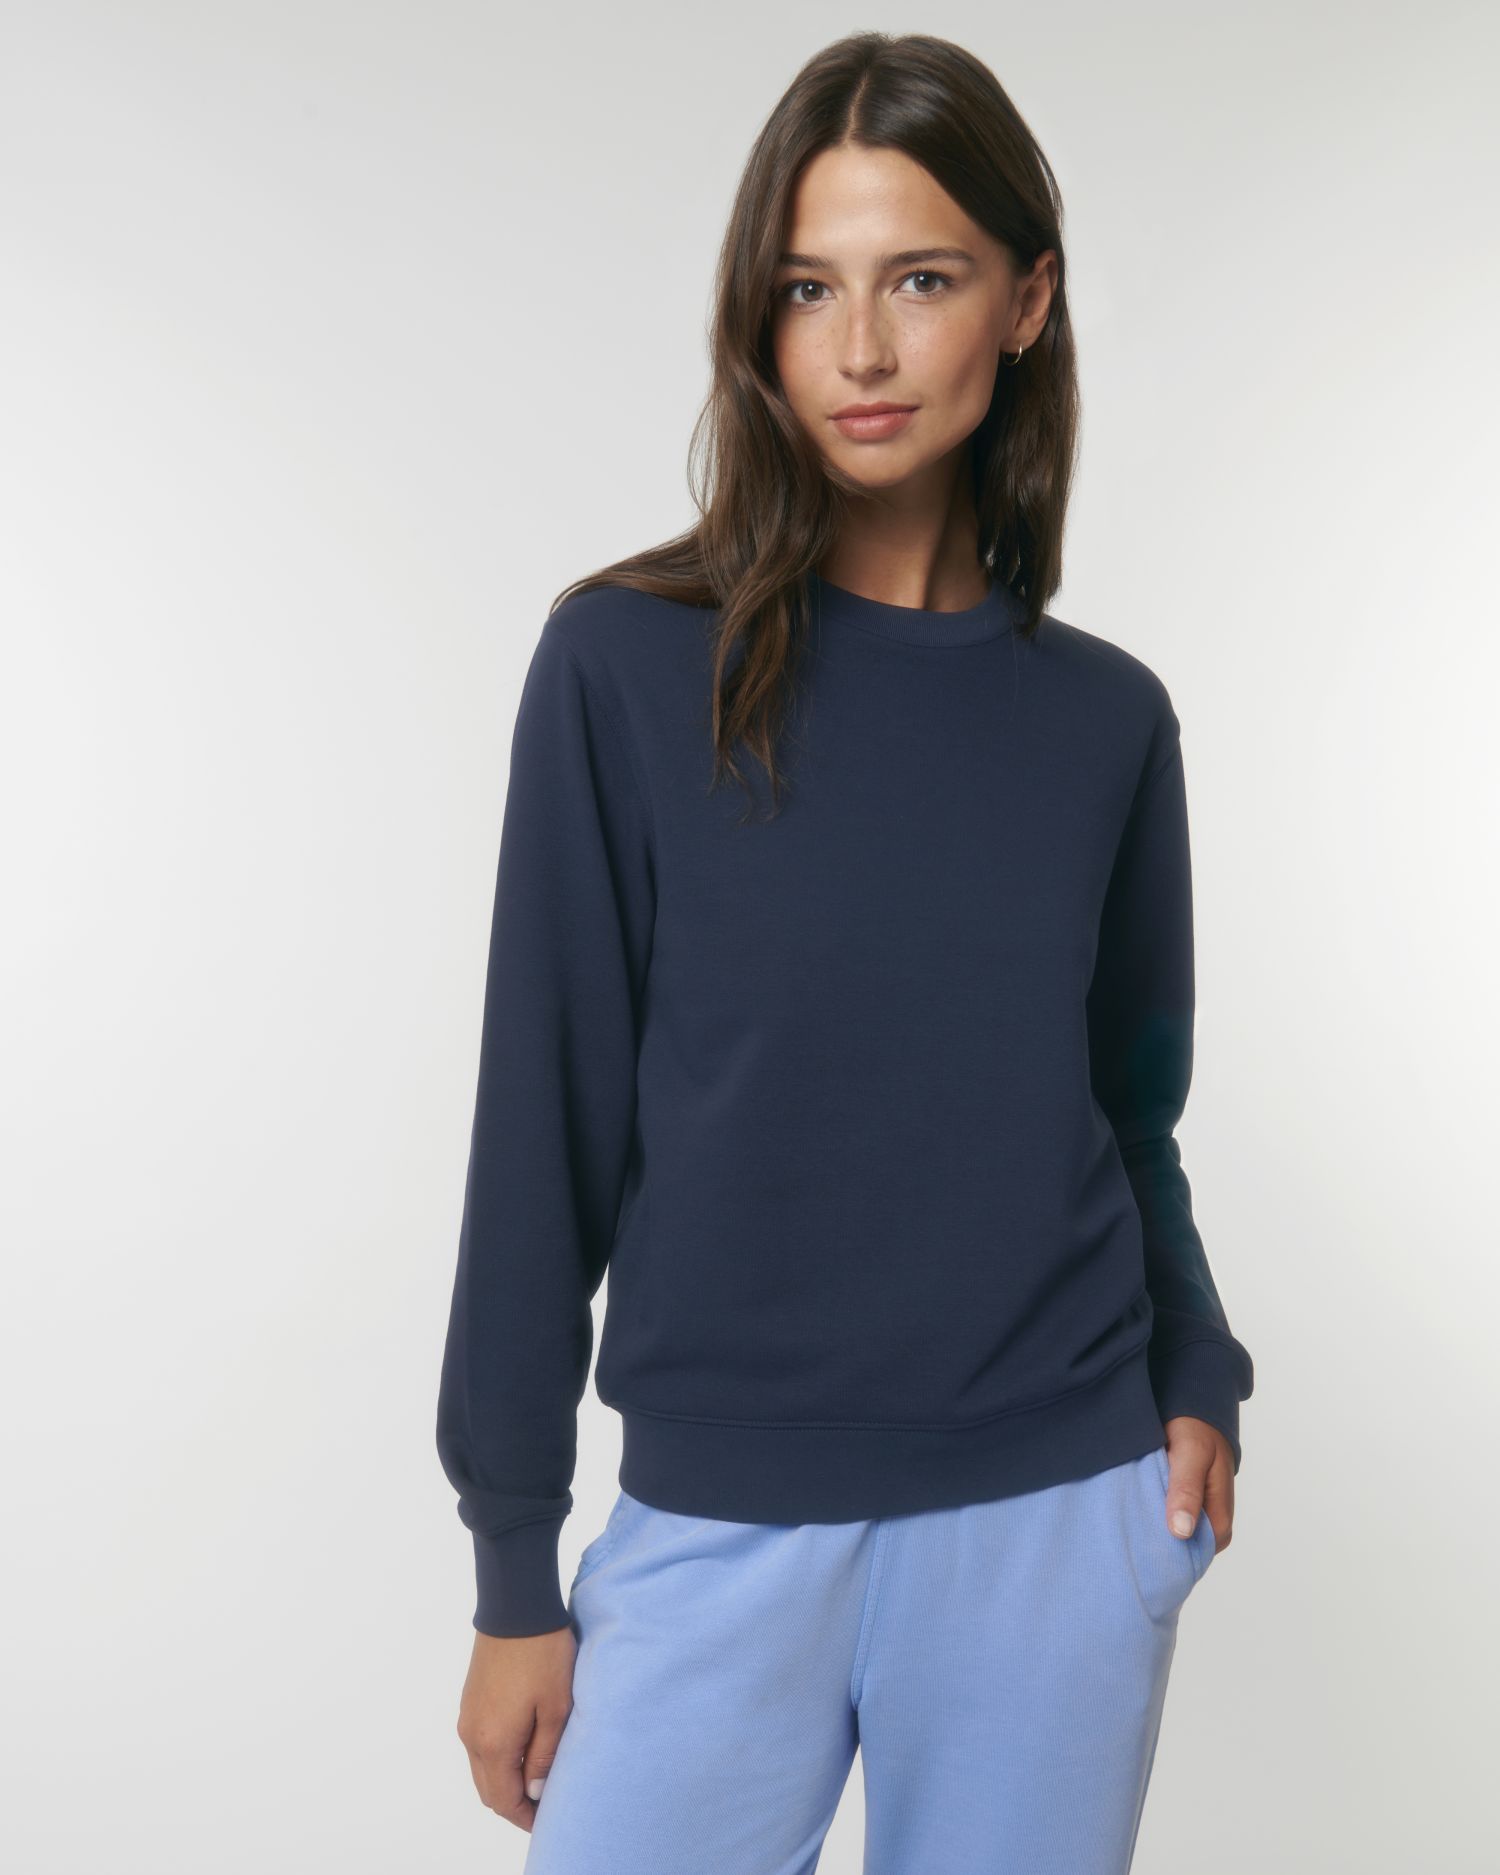  Matcher in Farbe French Navy